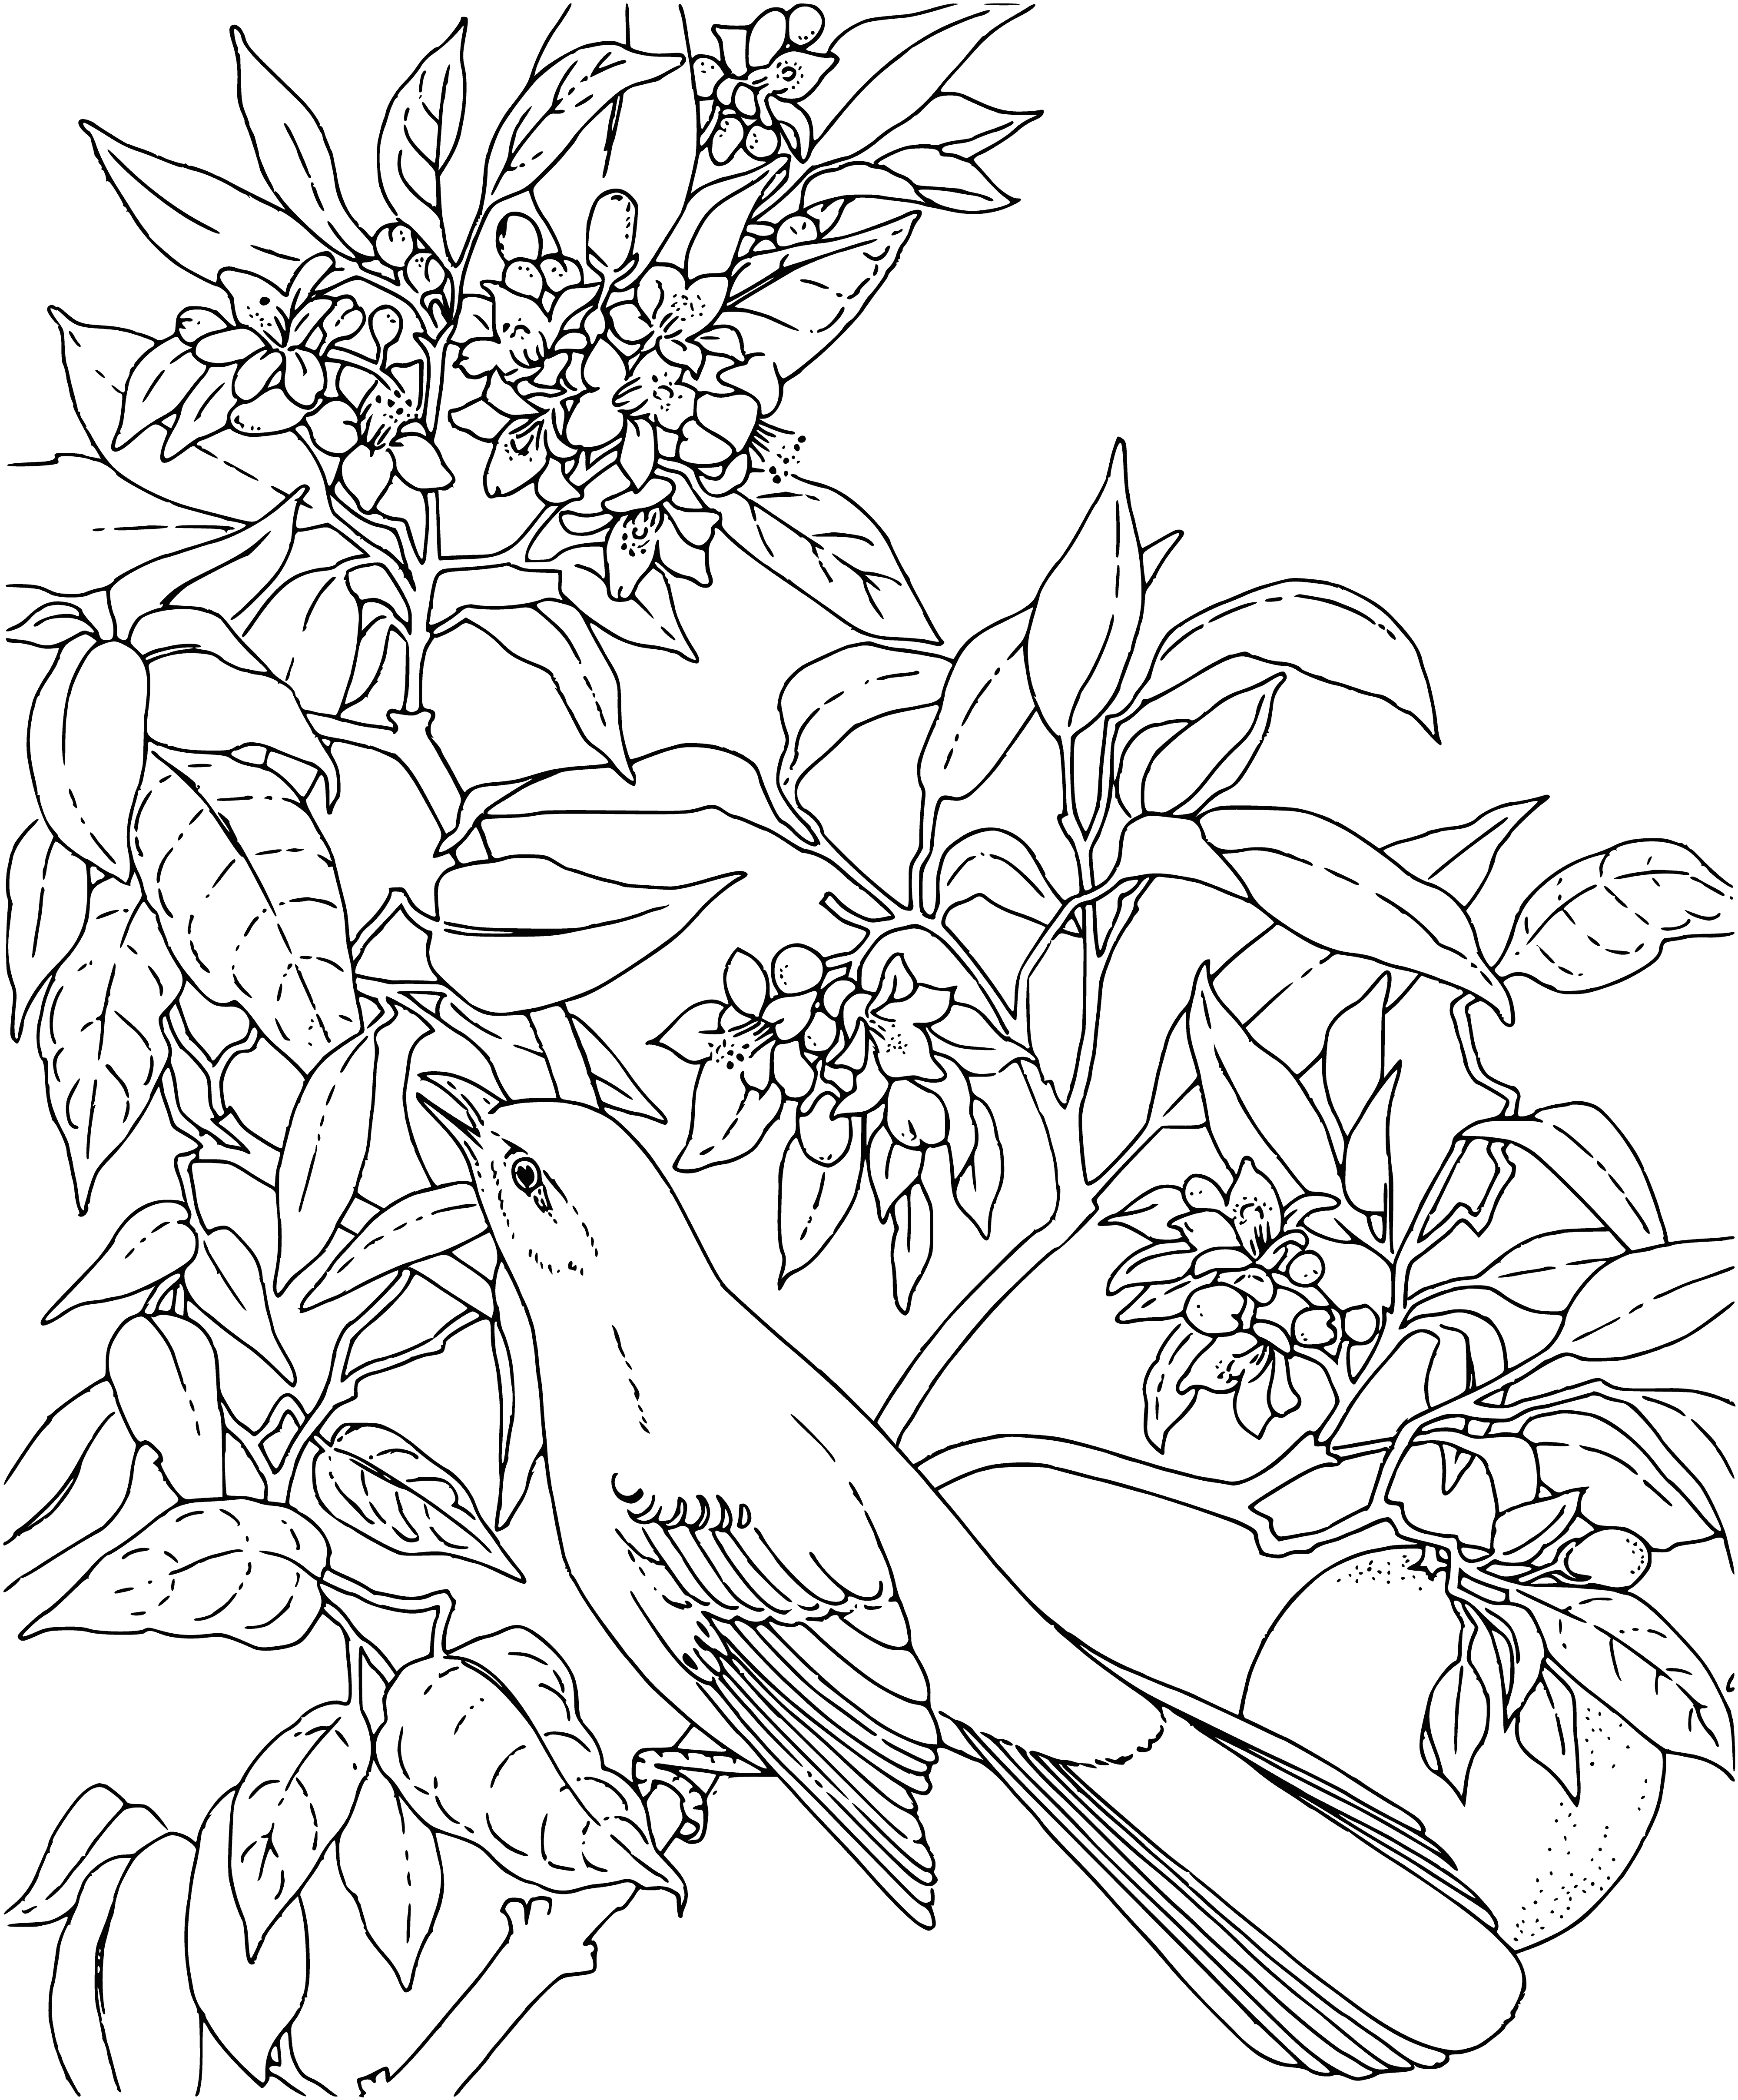 coloring page: Mockingbird on leafless branch surrounded by snow-covered landscape; gray & white feathers, long tail, black beak & black legs.